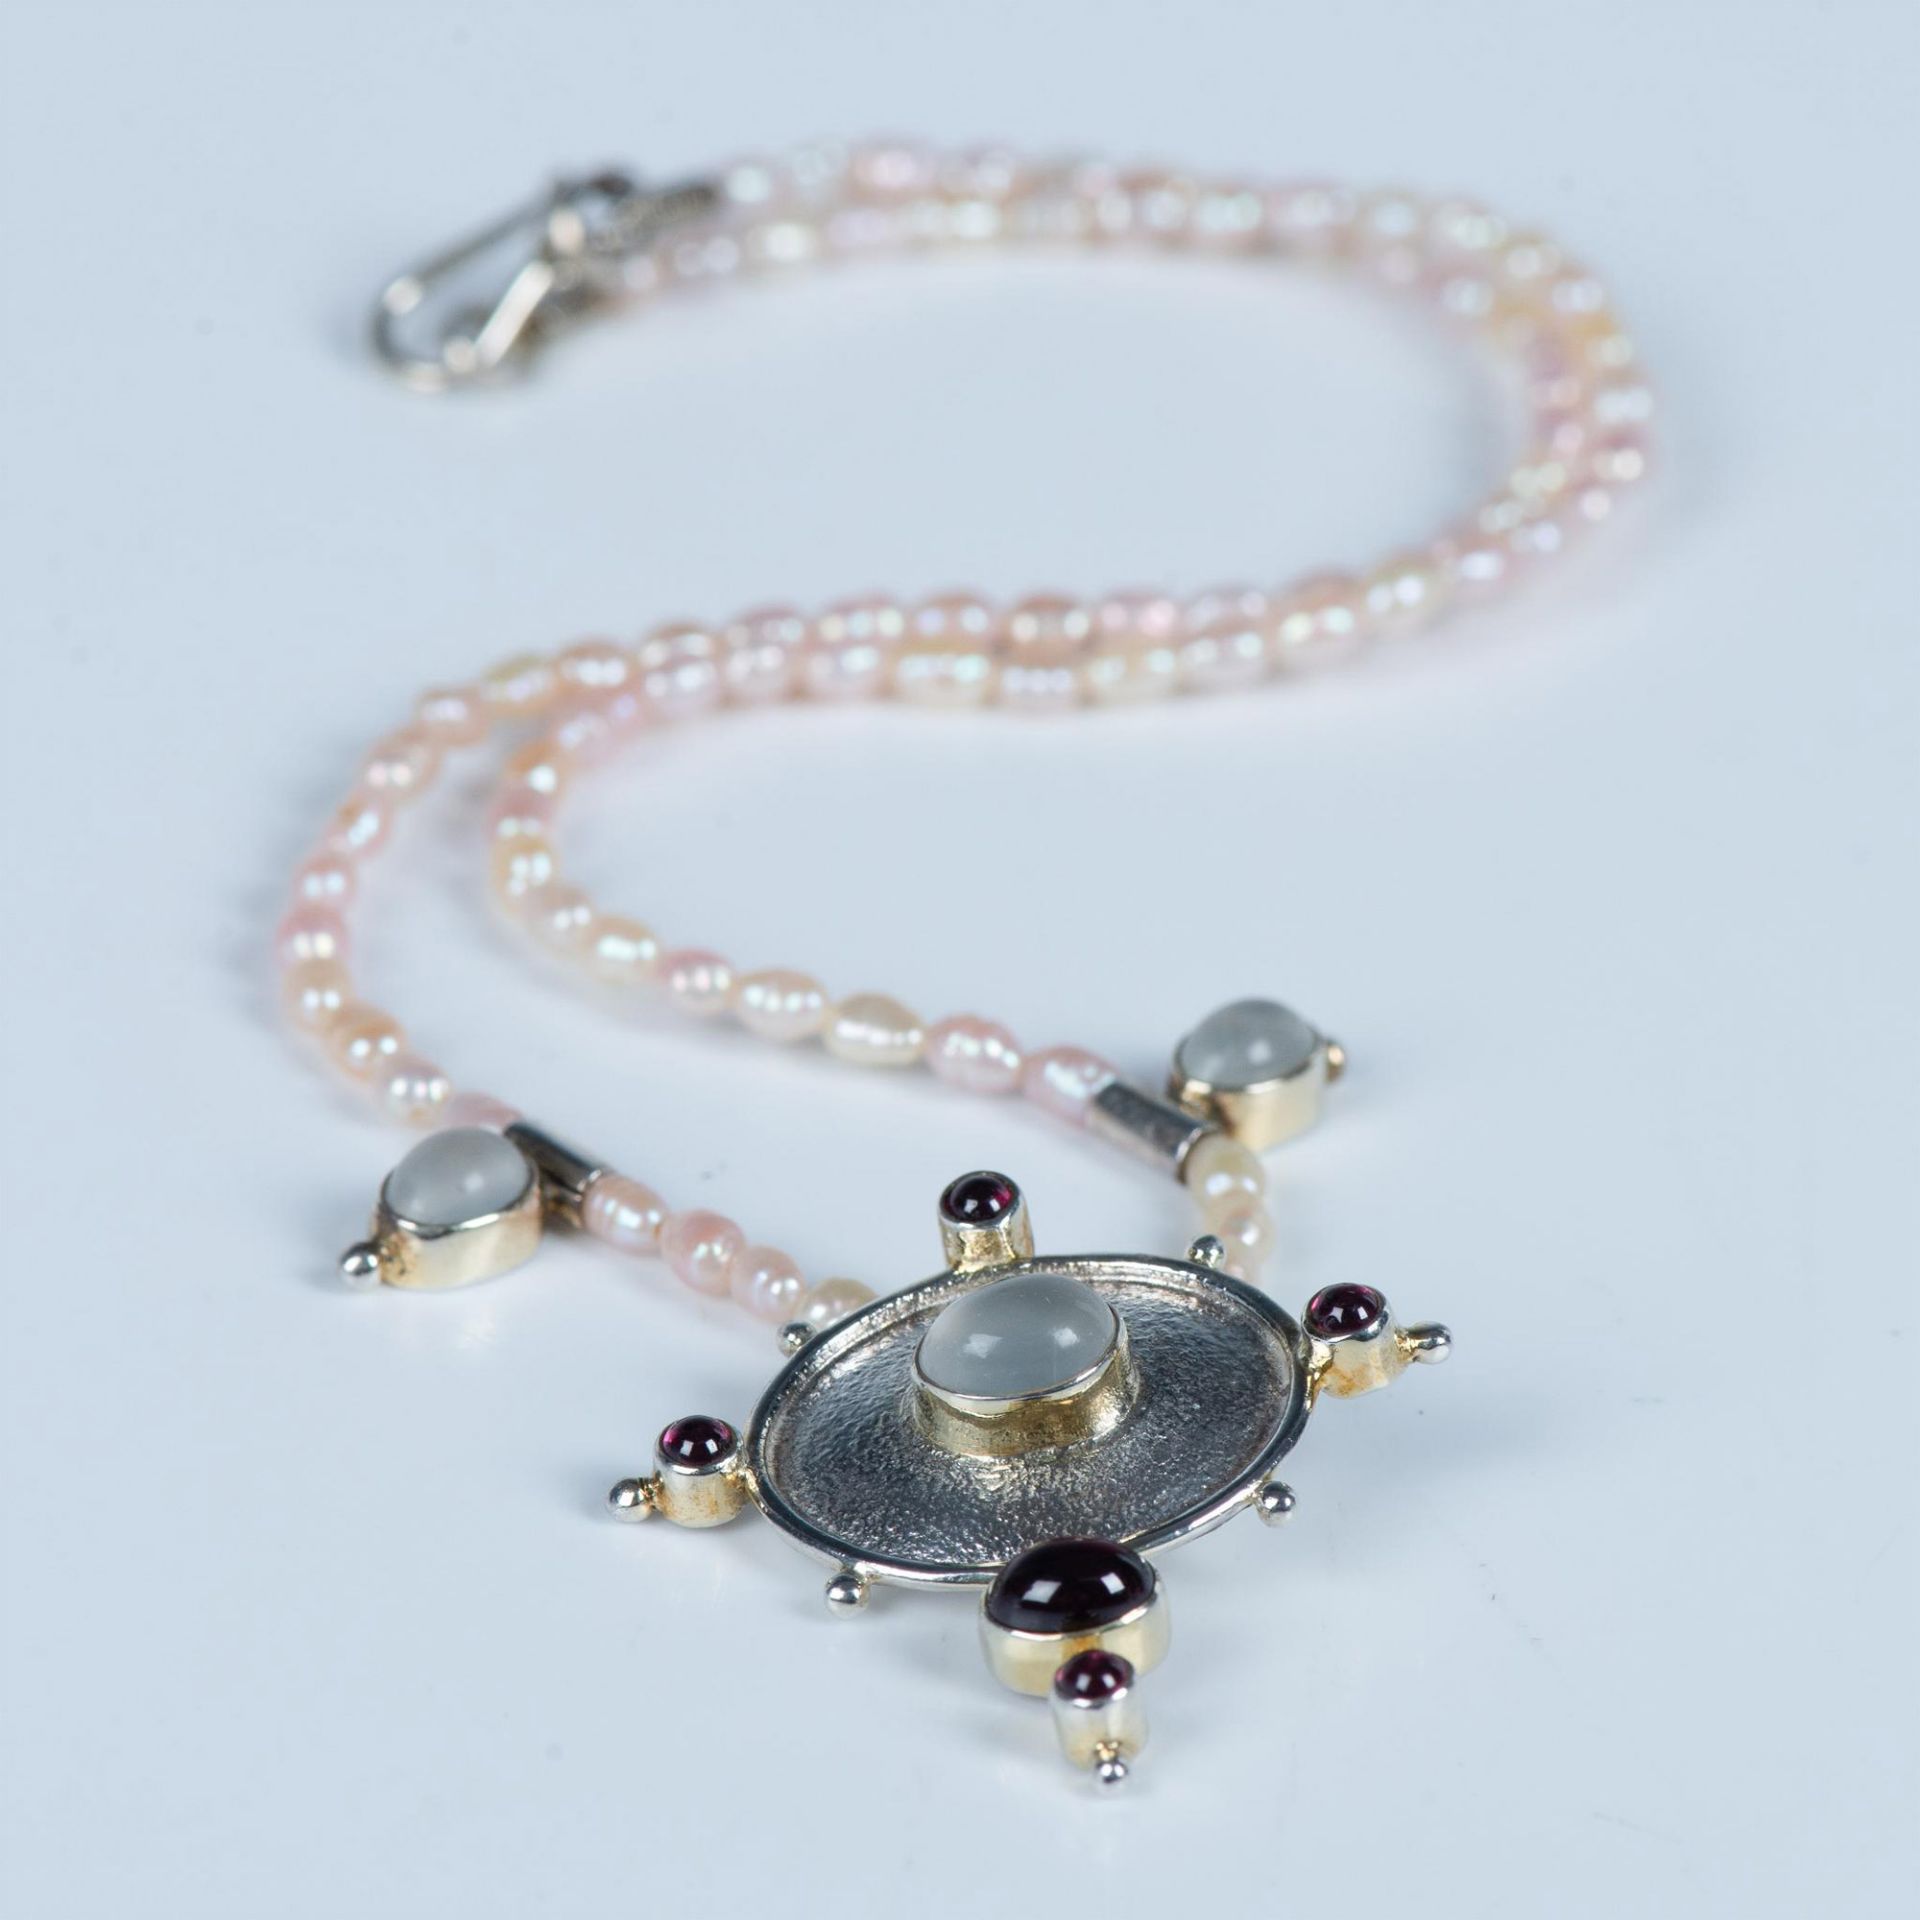 Fabulous Sterling Silver Baroque Pink Pearl, Garnet and Moonstone Necklace - Image 3 of 4